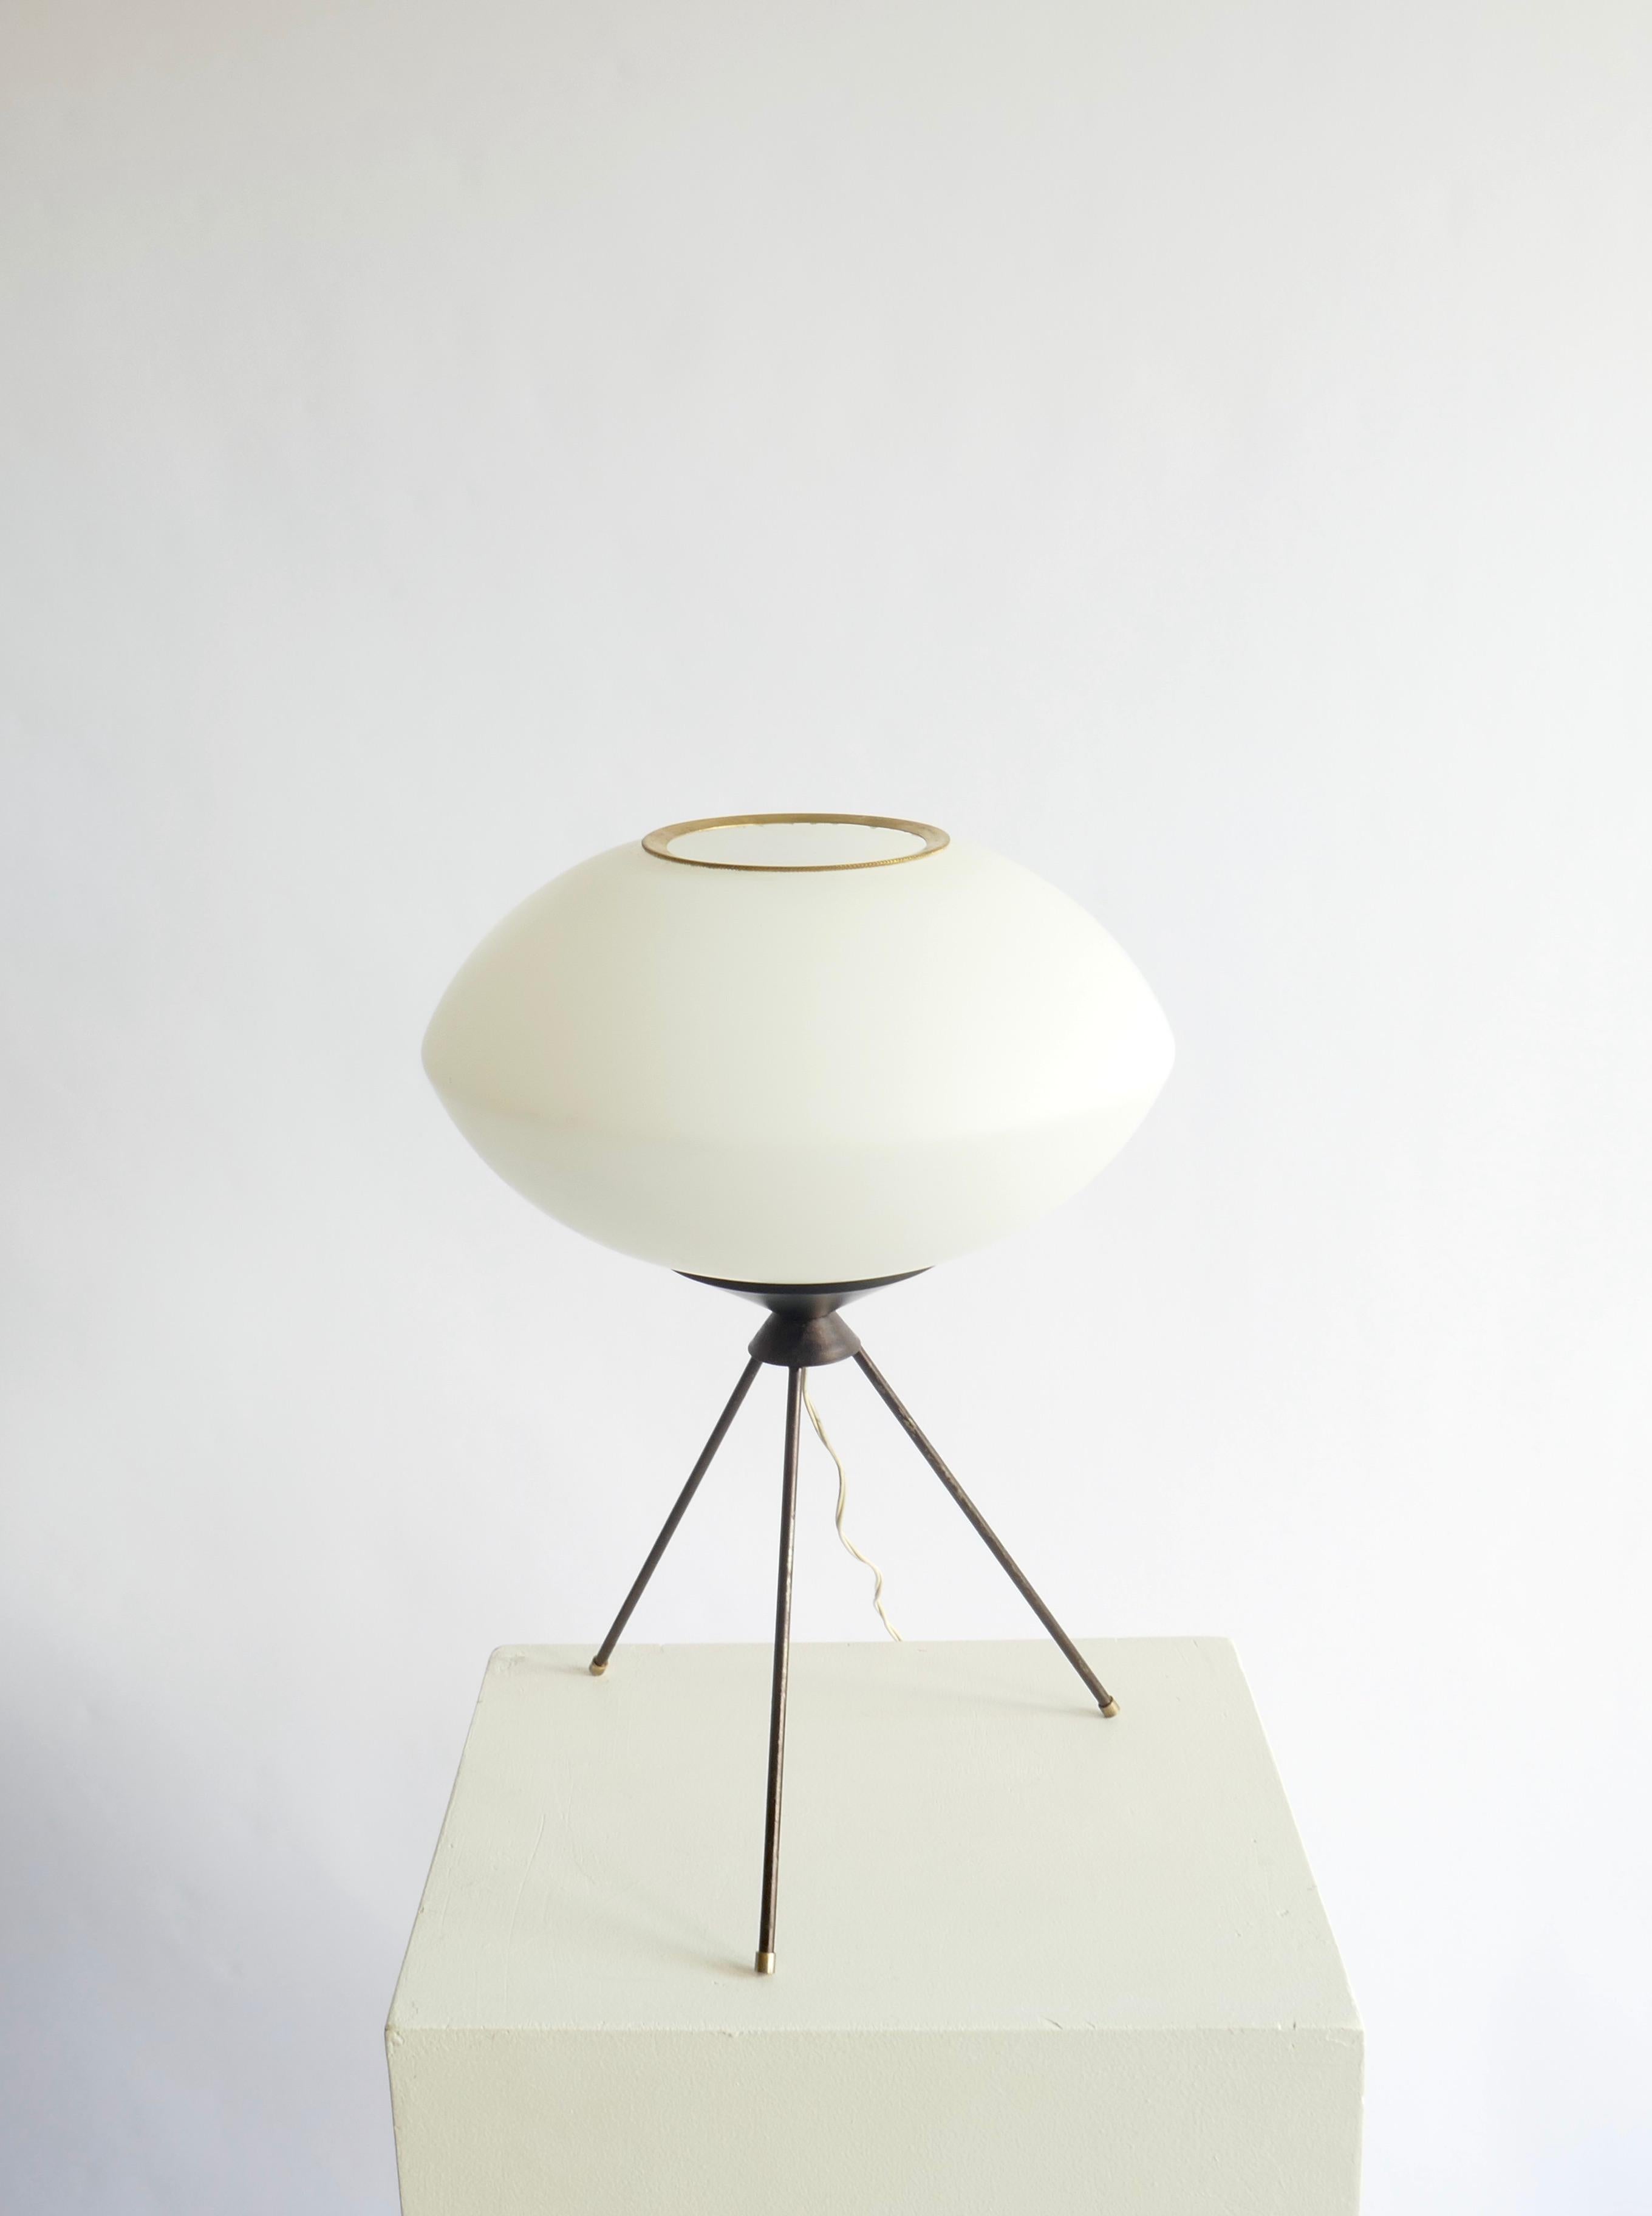 A versatile table lamp. A wrought iron tripod base and an opaline glass globe.
Italy, 1950s.

